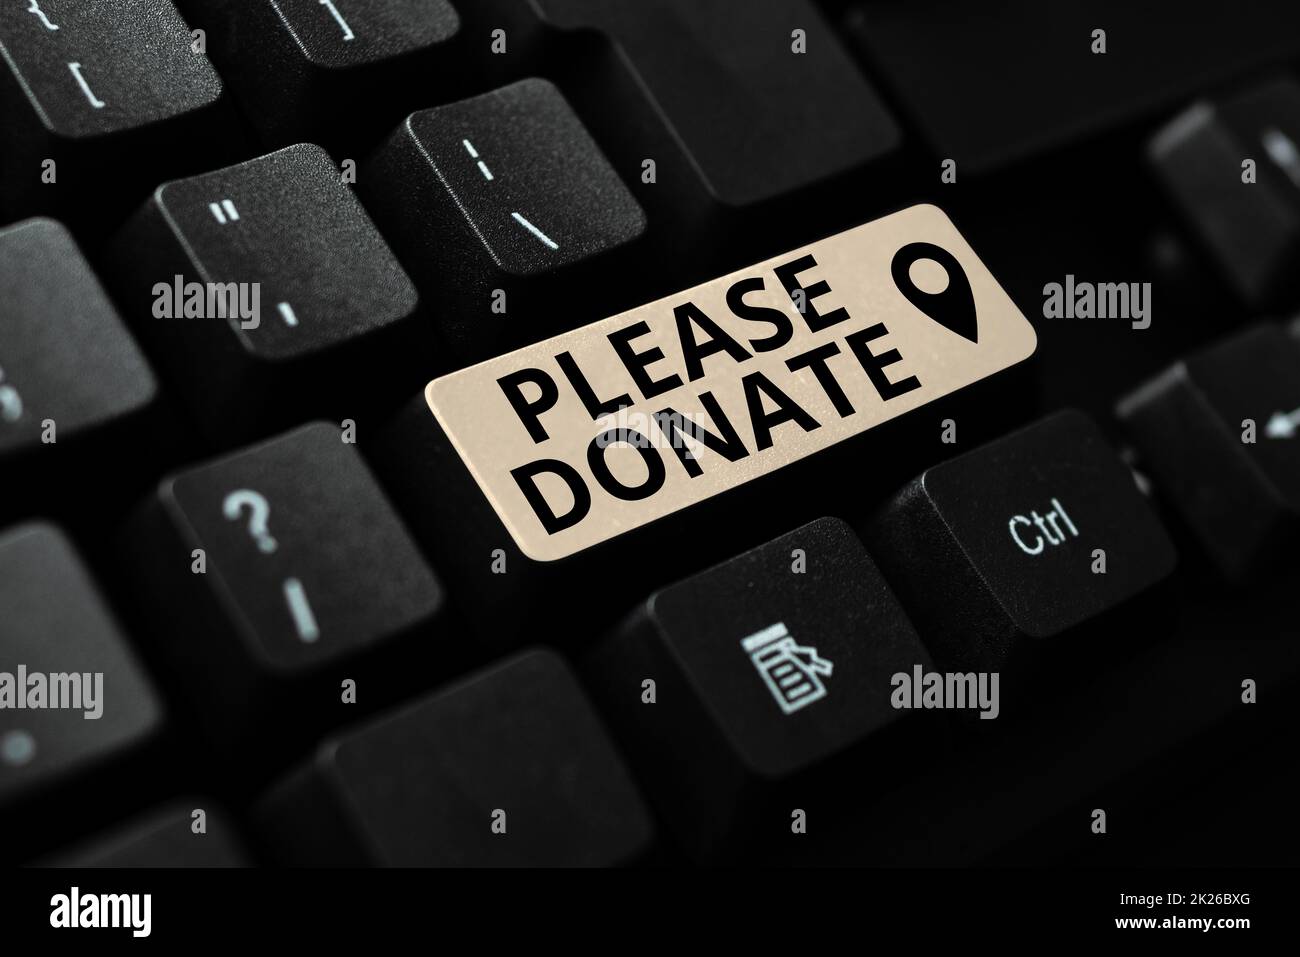 Text showing inspiration Please Donate. Business overview Supply Furnish Hand out Contribute Grant Aid to Charity Converting Analog Data To Digital Media, Typing Forum Helpful Tips Stock Photo